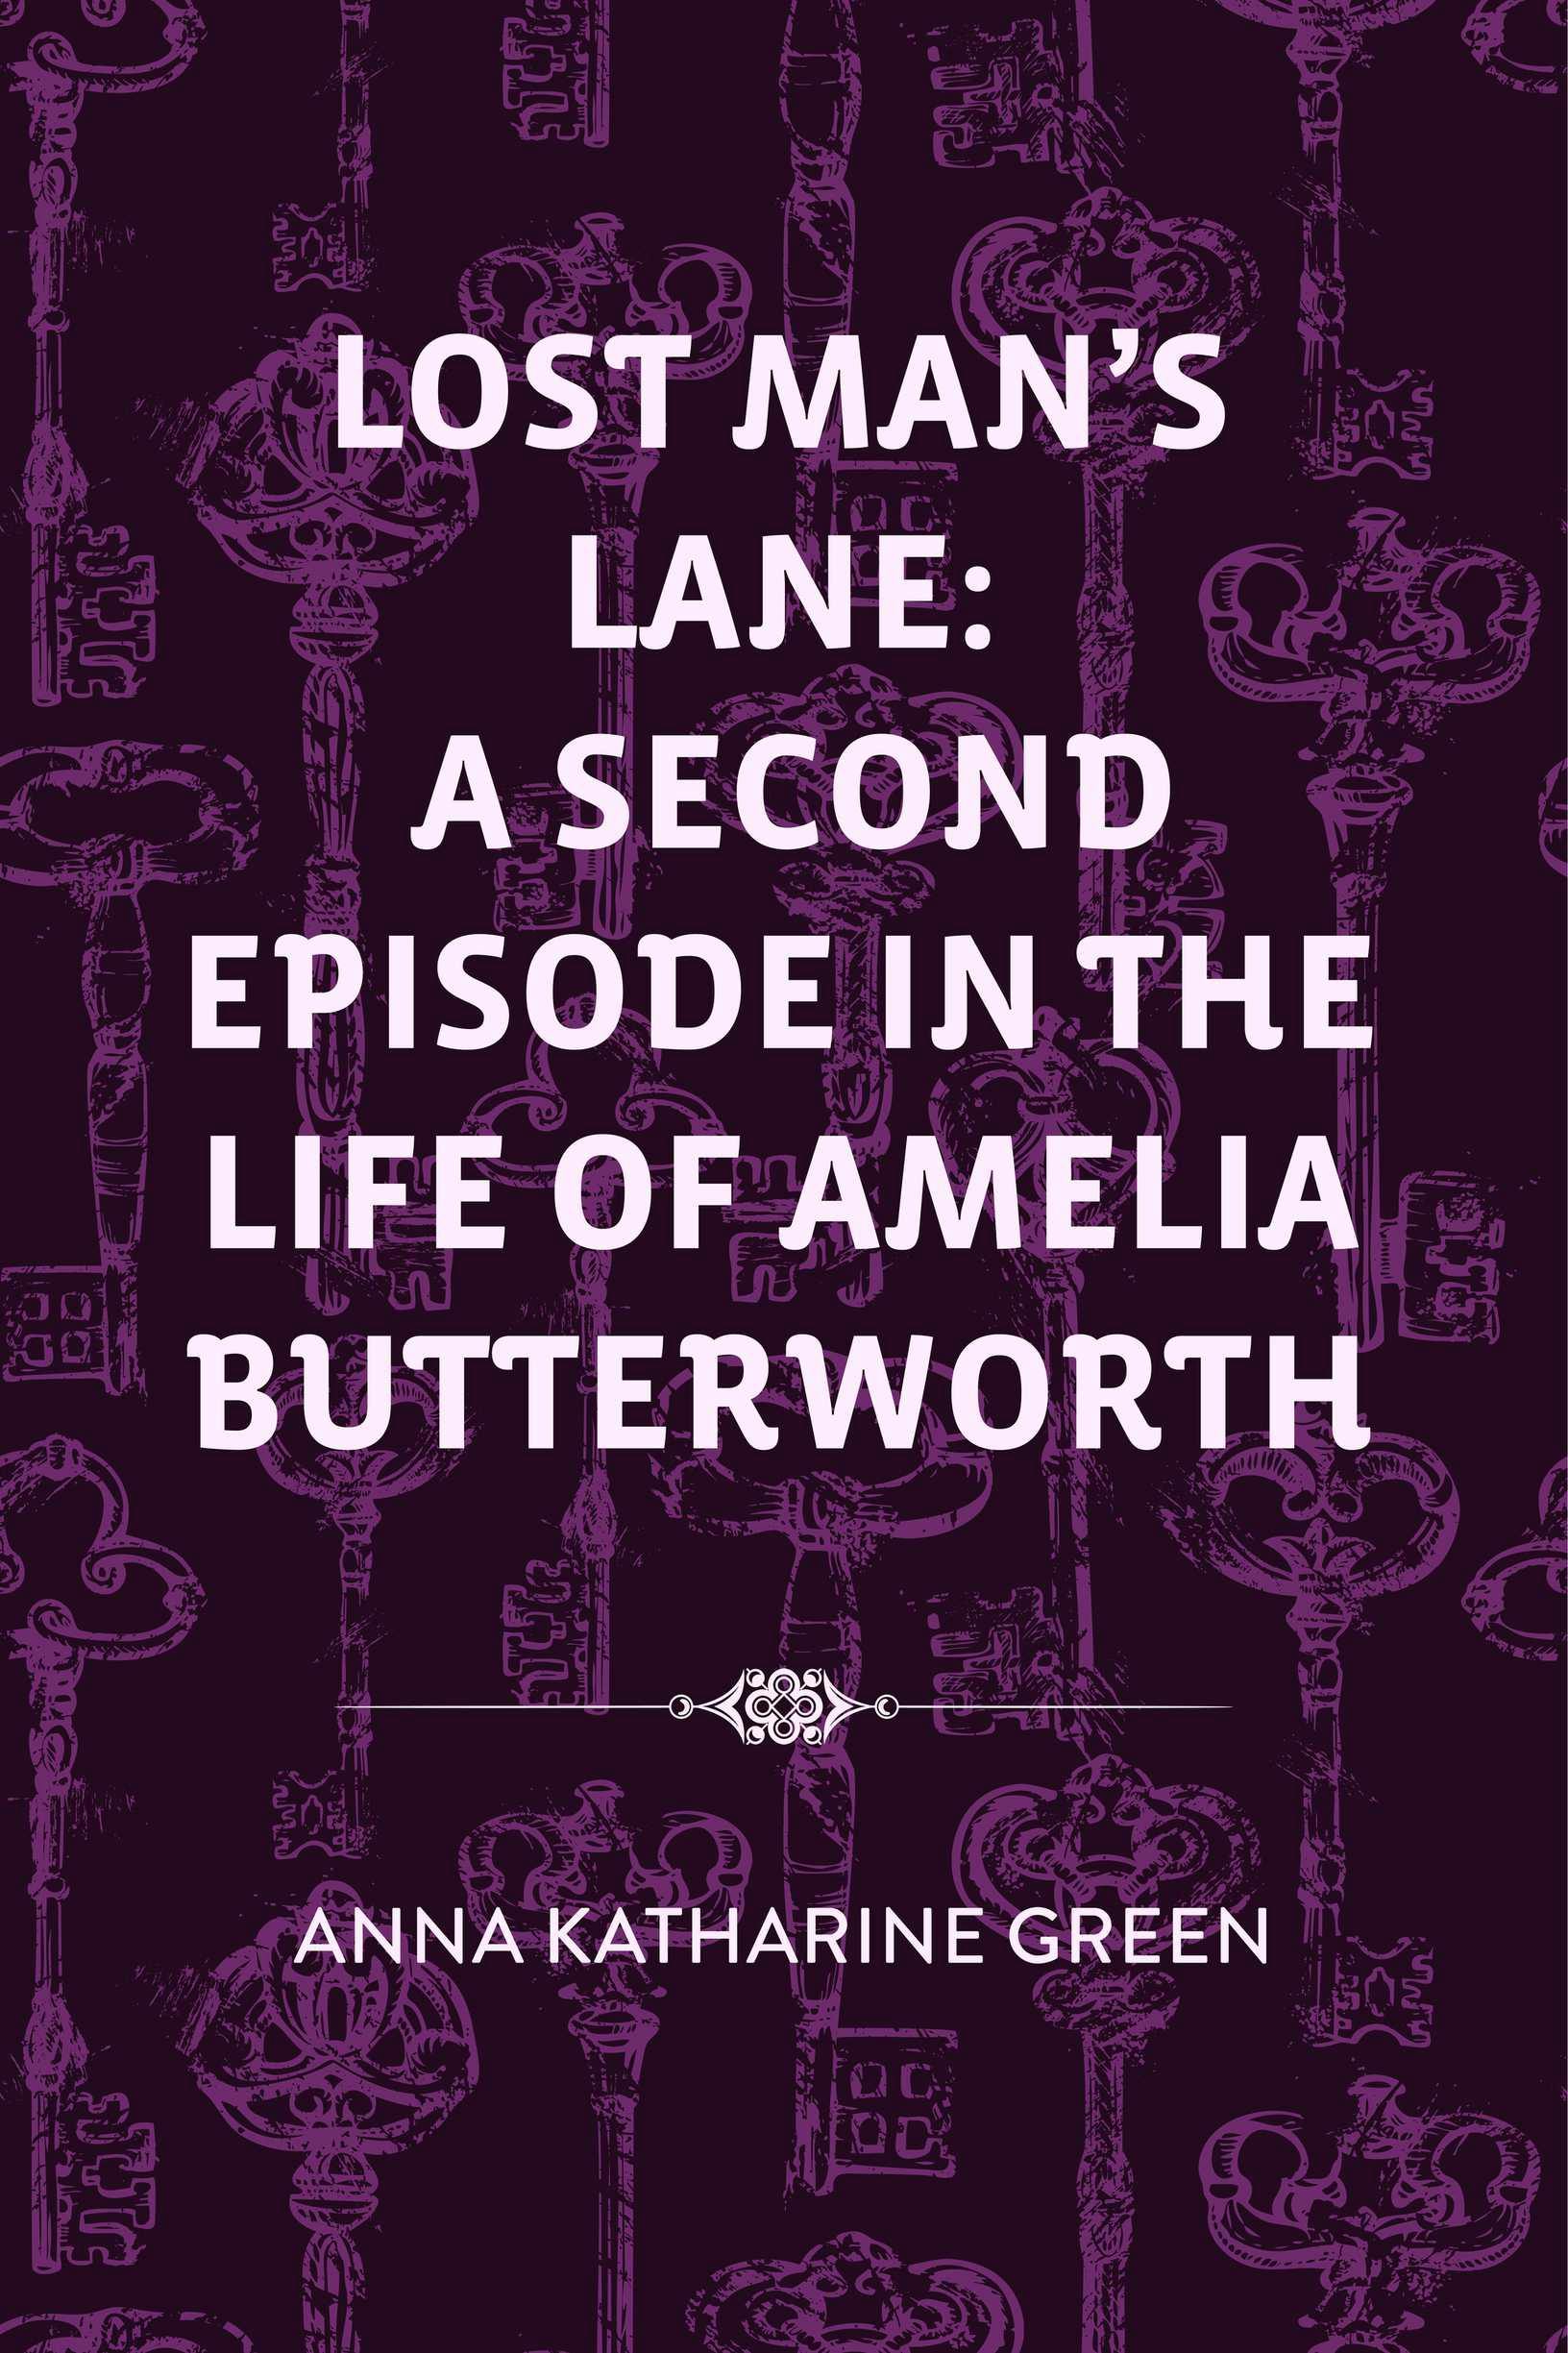 Lost Man's Lane: A Second Episode in the Life of Amelia Butterworth - Anna Katharine Green